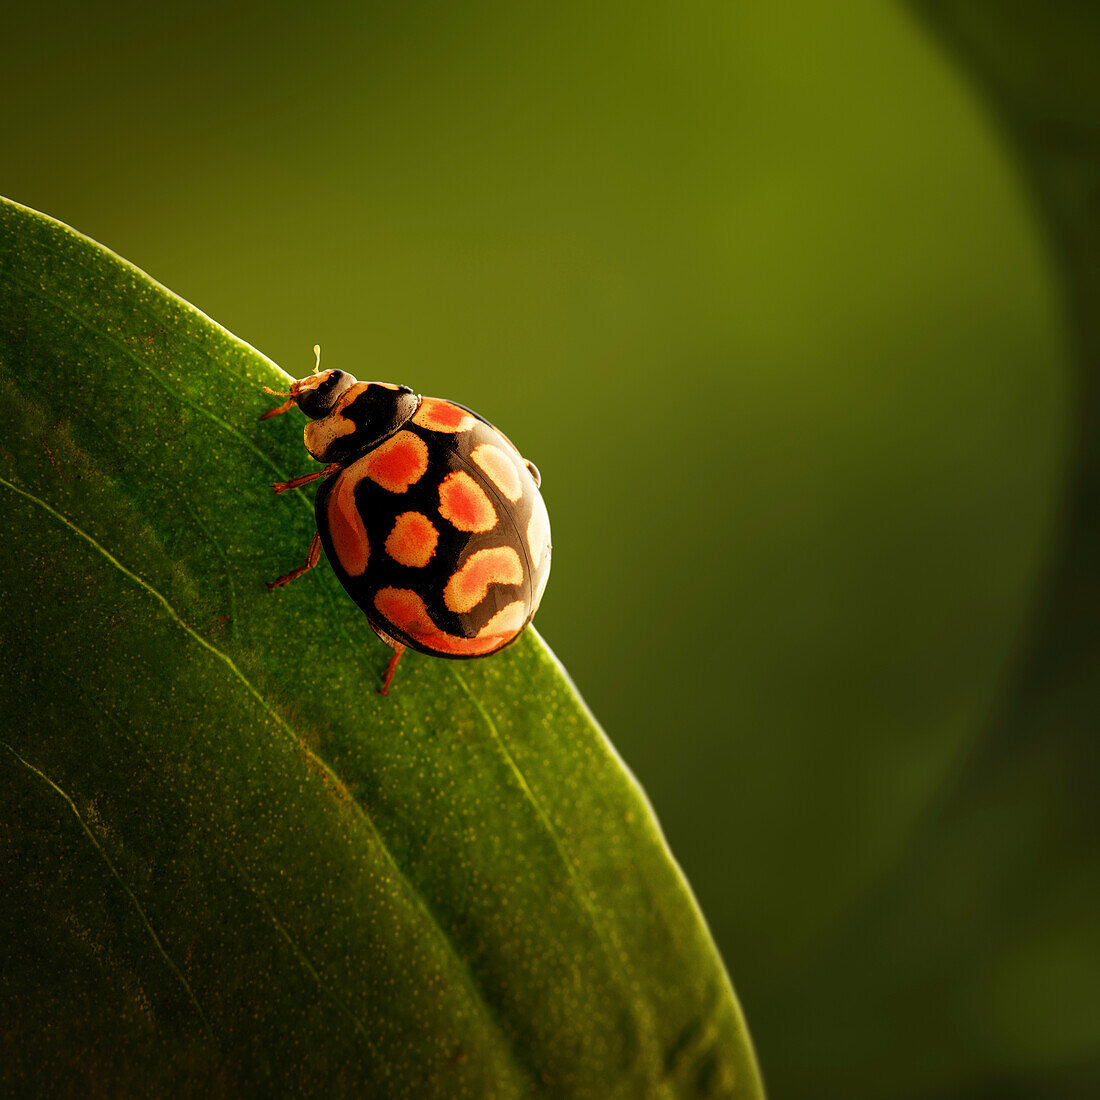 Ladybird perched on green leaf